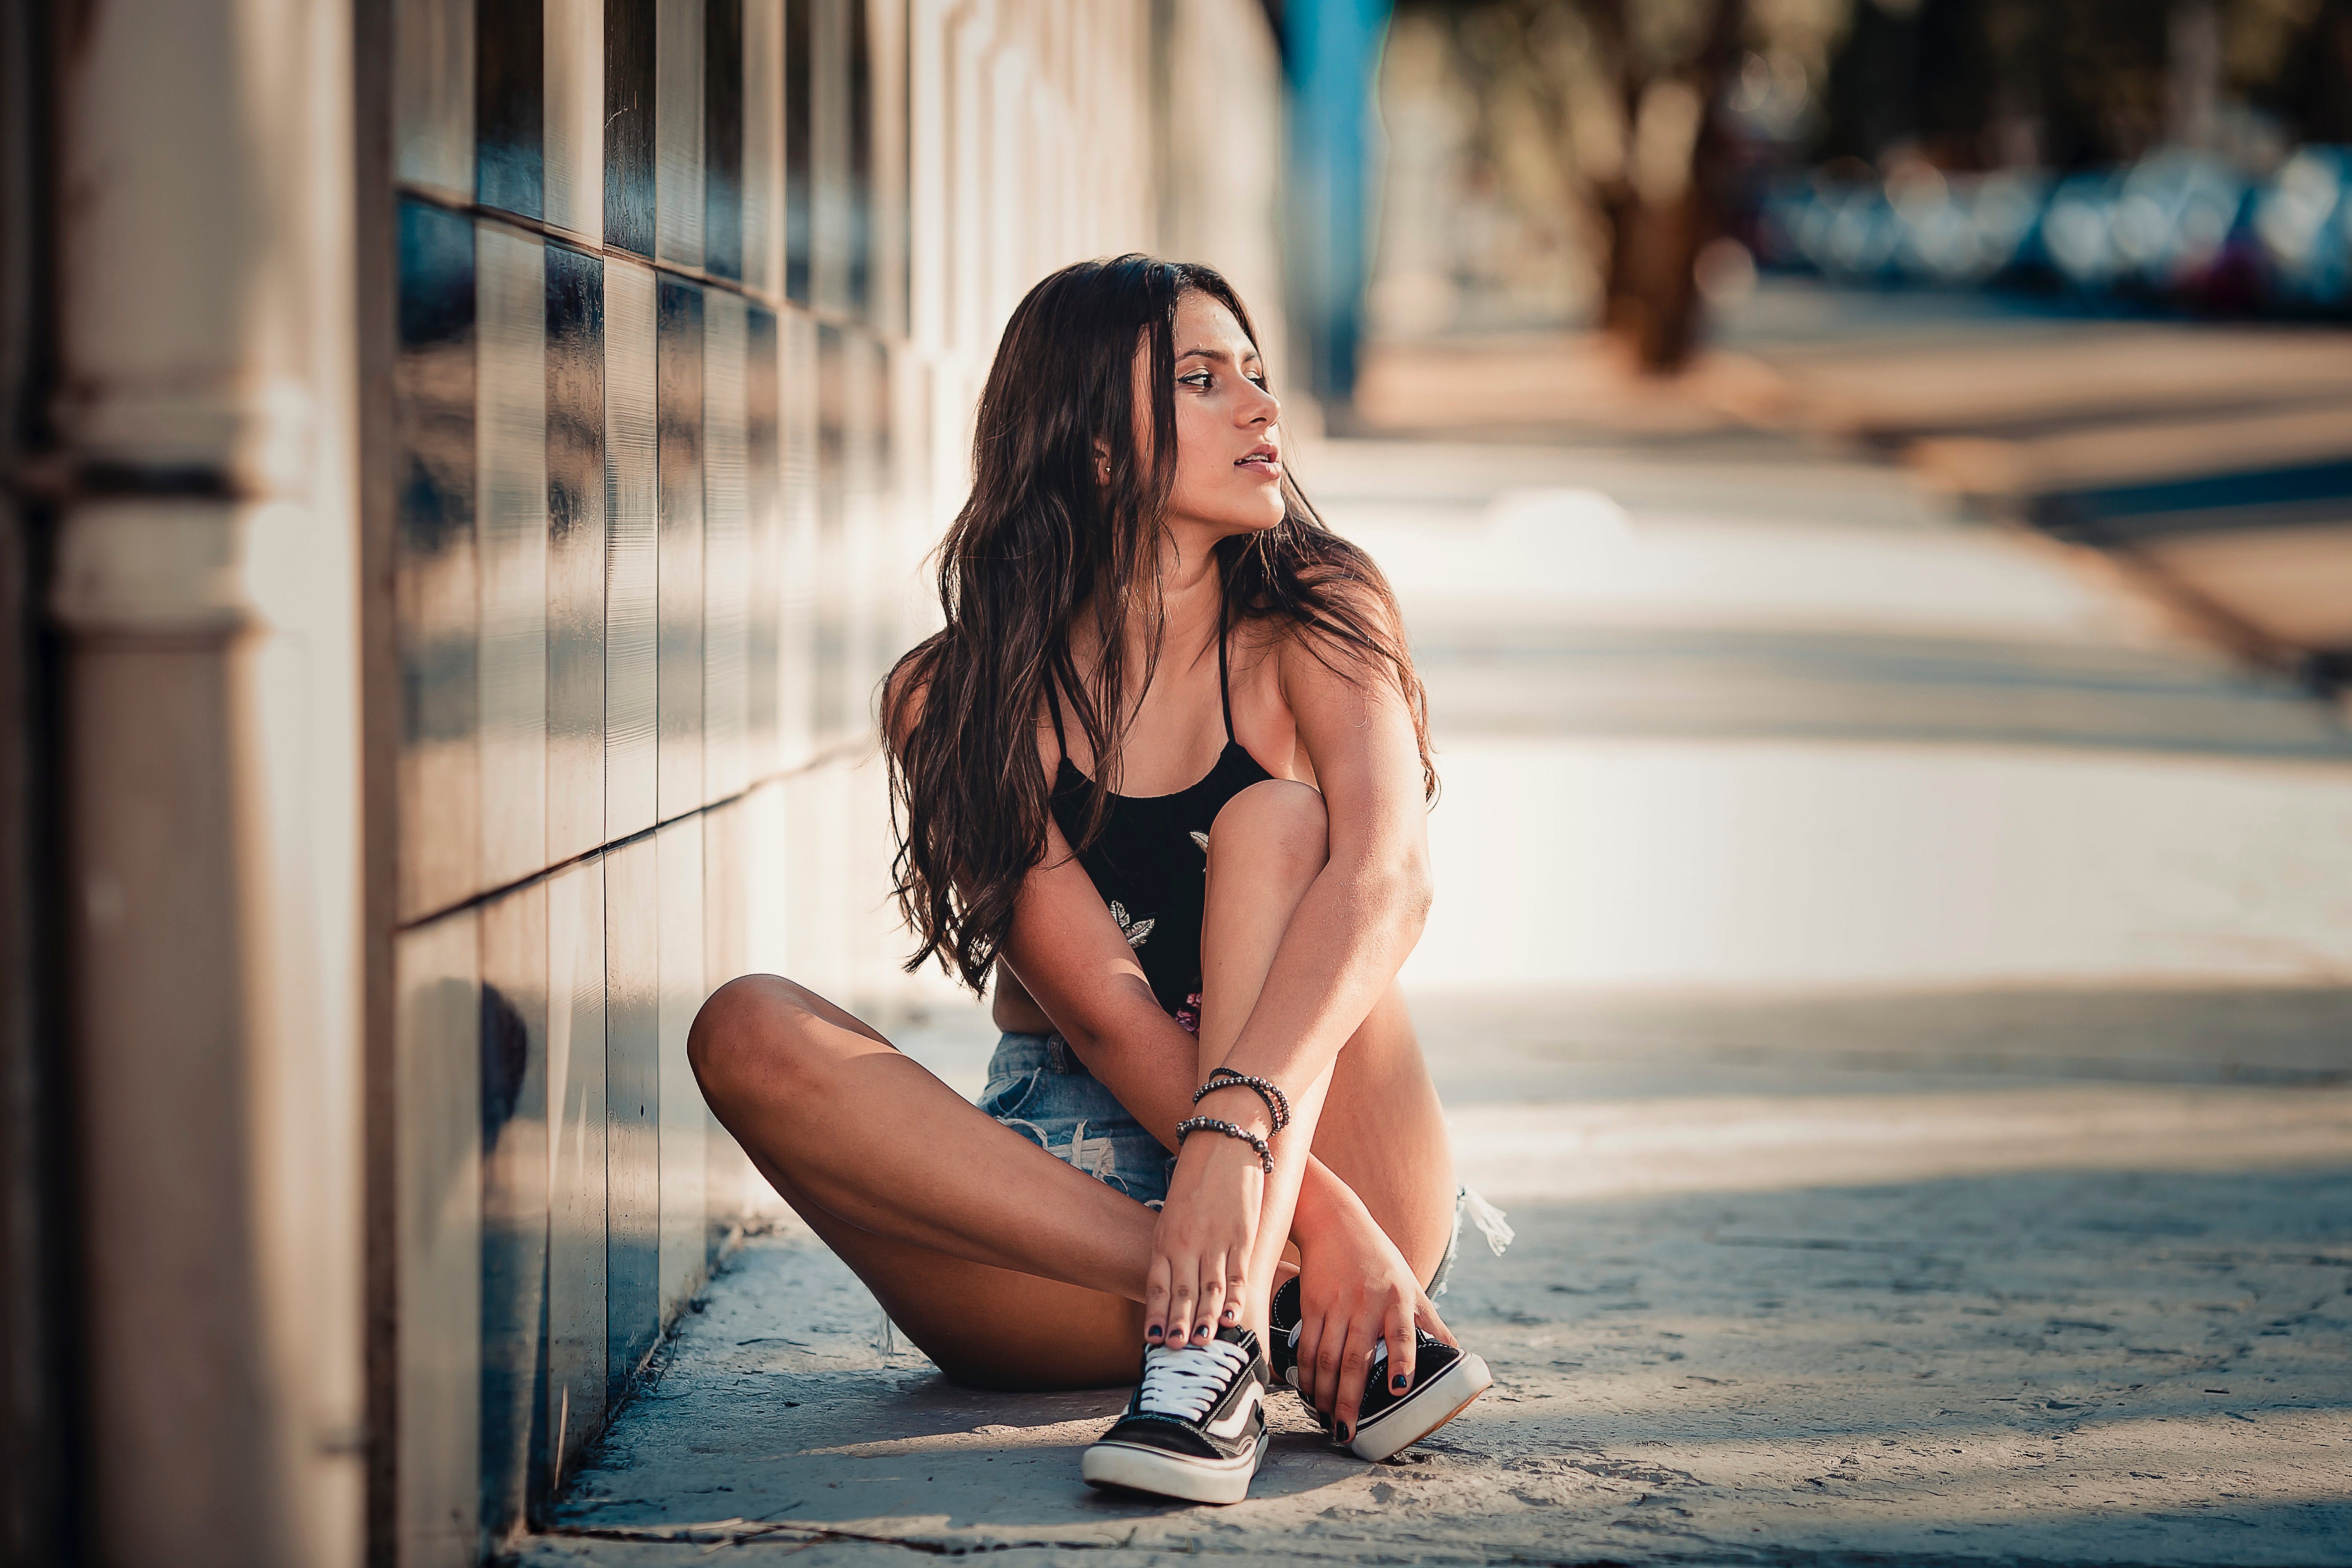 Girl sitting down on a street and posing